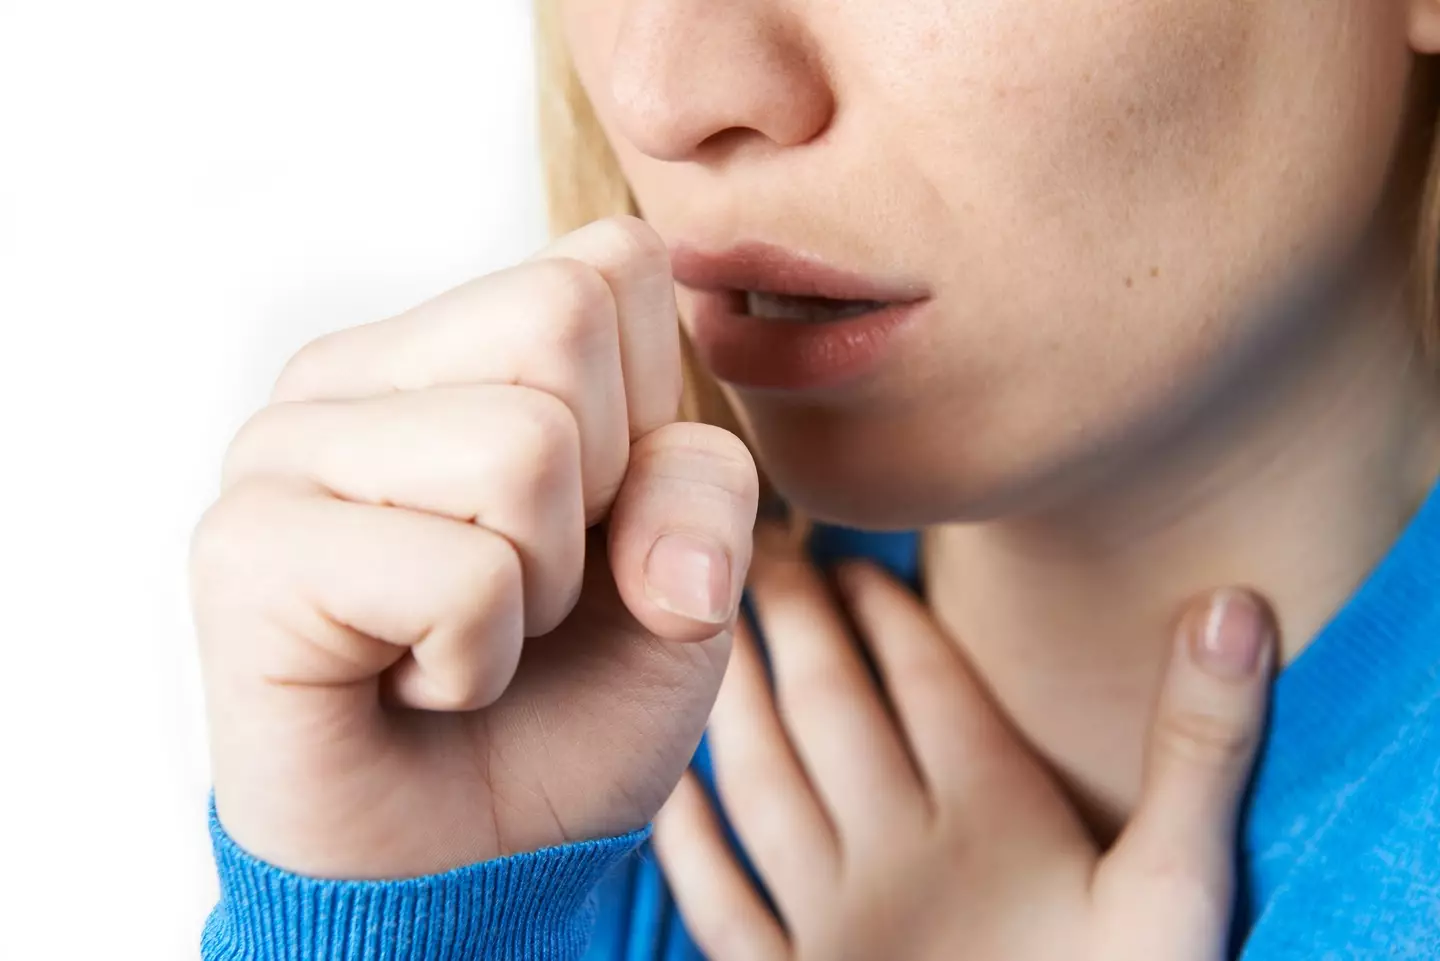 Parents have been warned over the whooping cough outbreak. (Highwaystarz-Photography / Getty Images)